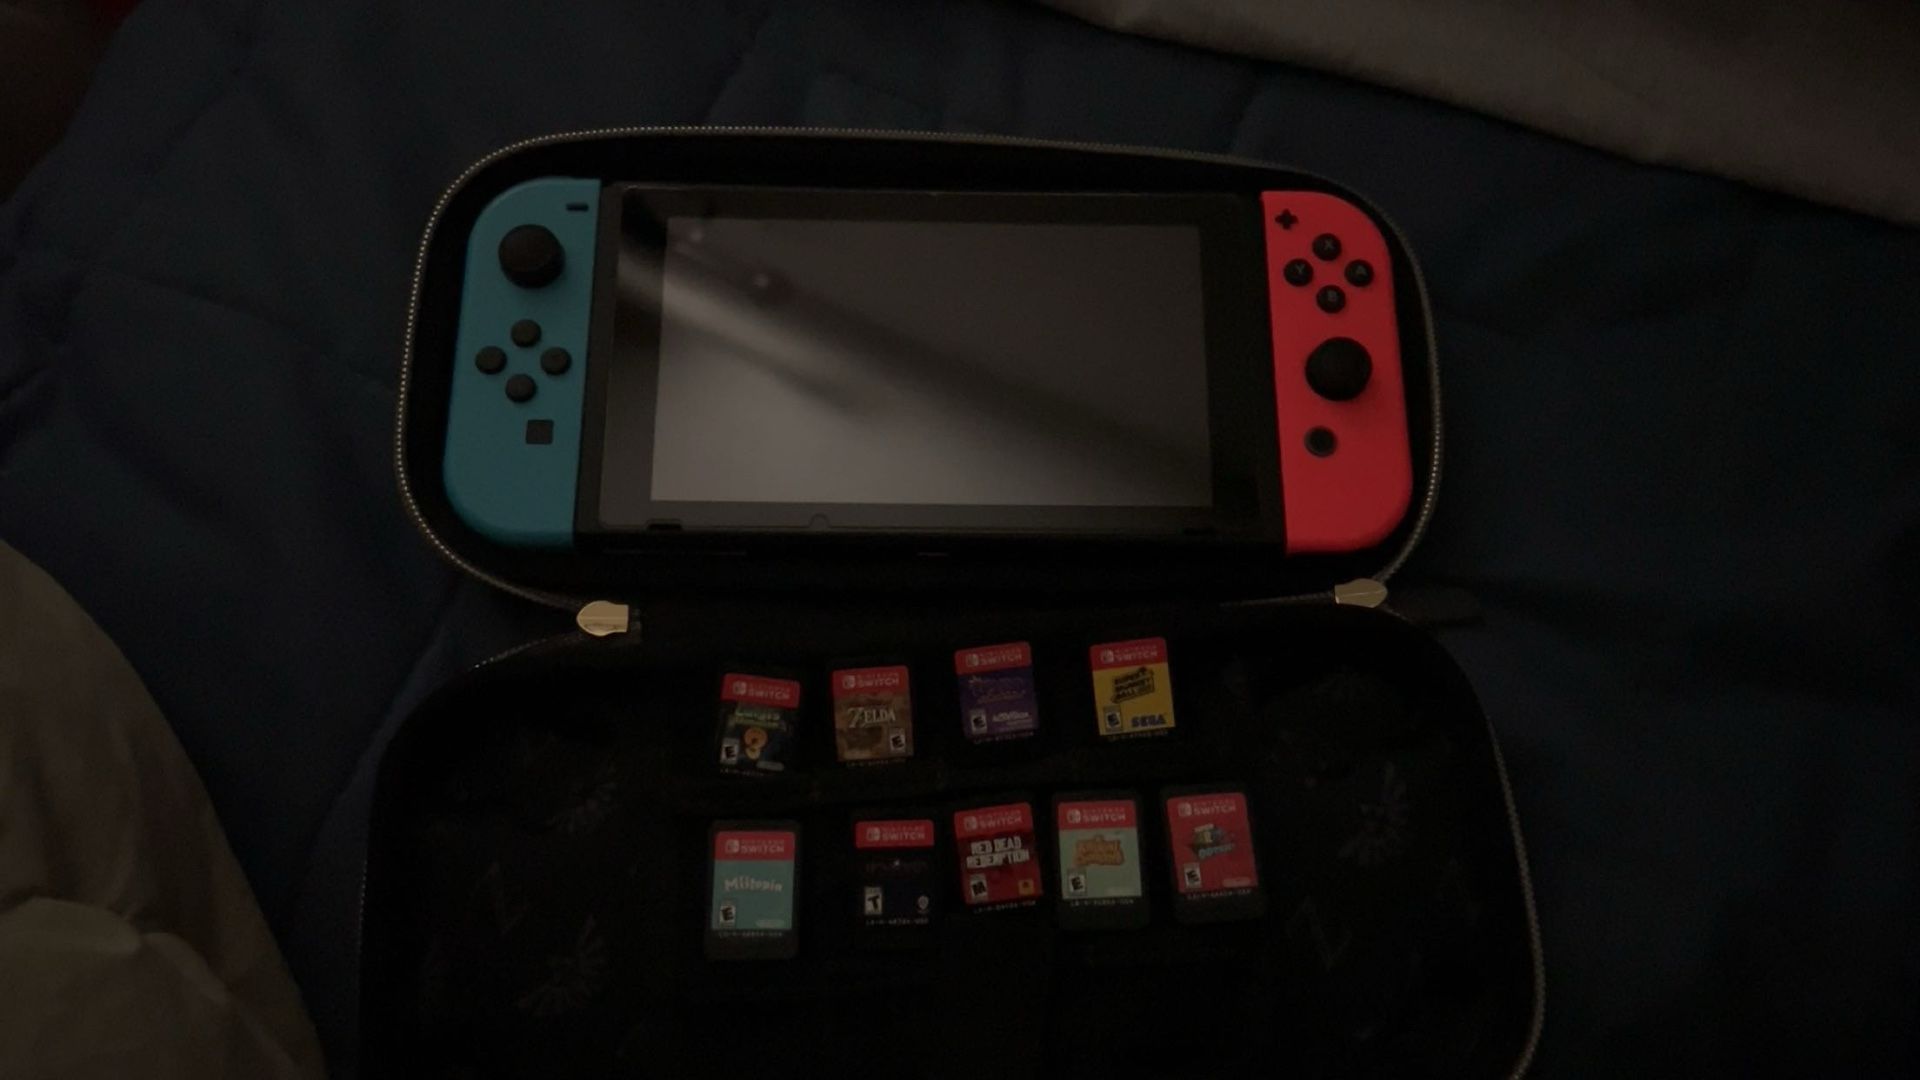 Nitendo switch with Screen Protector, Zelda Case & 9 Games